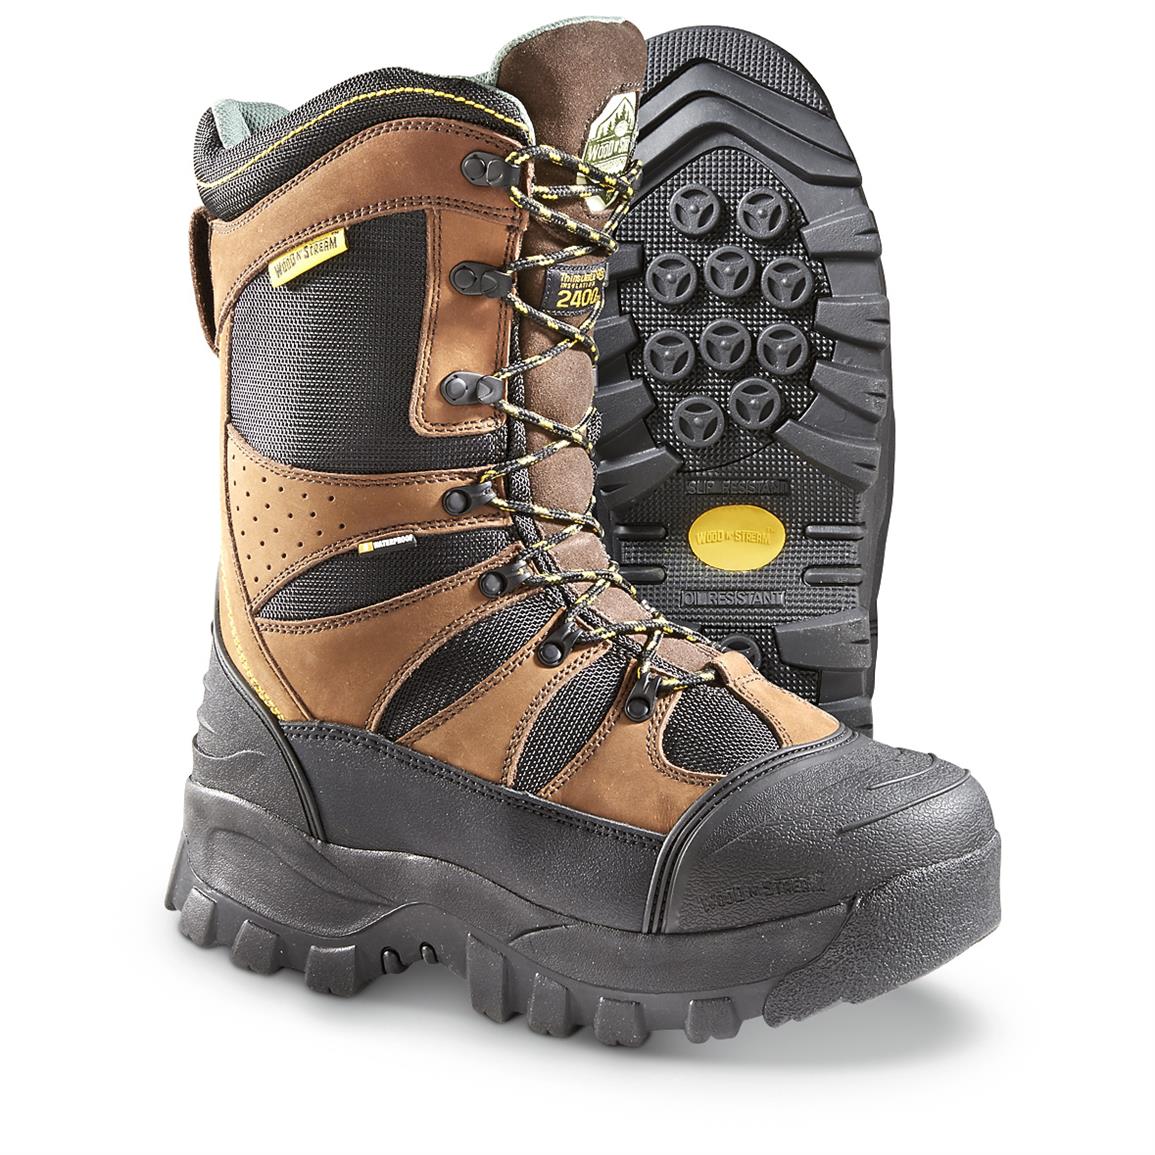 2400 gram thinsulate hunting boots,Save up to 17%,www.ilcascinone.com